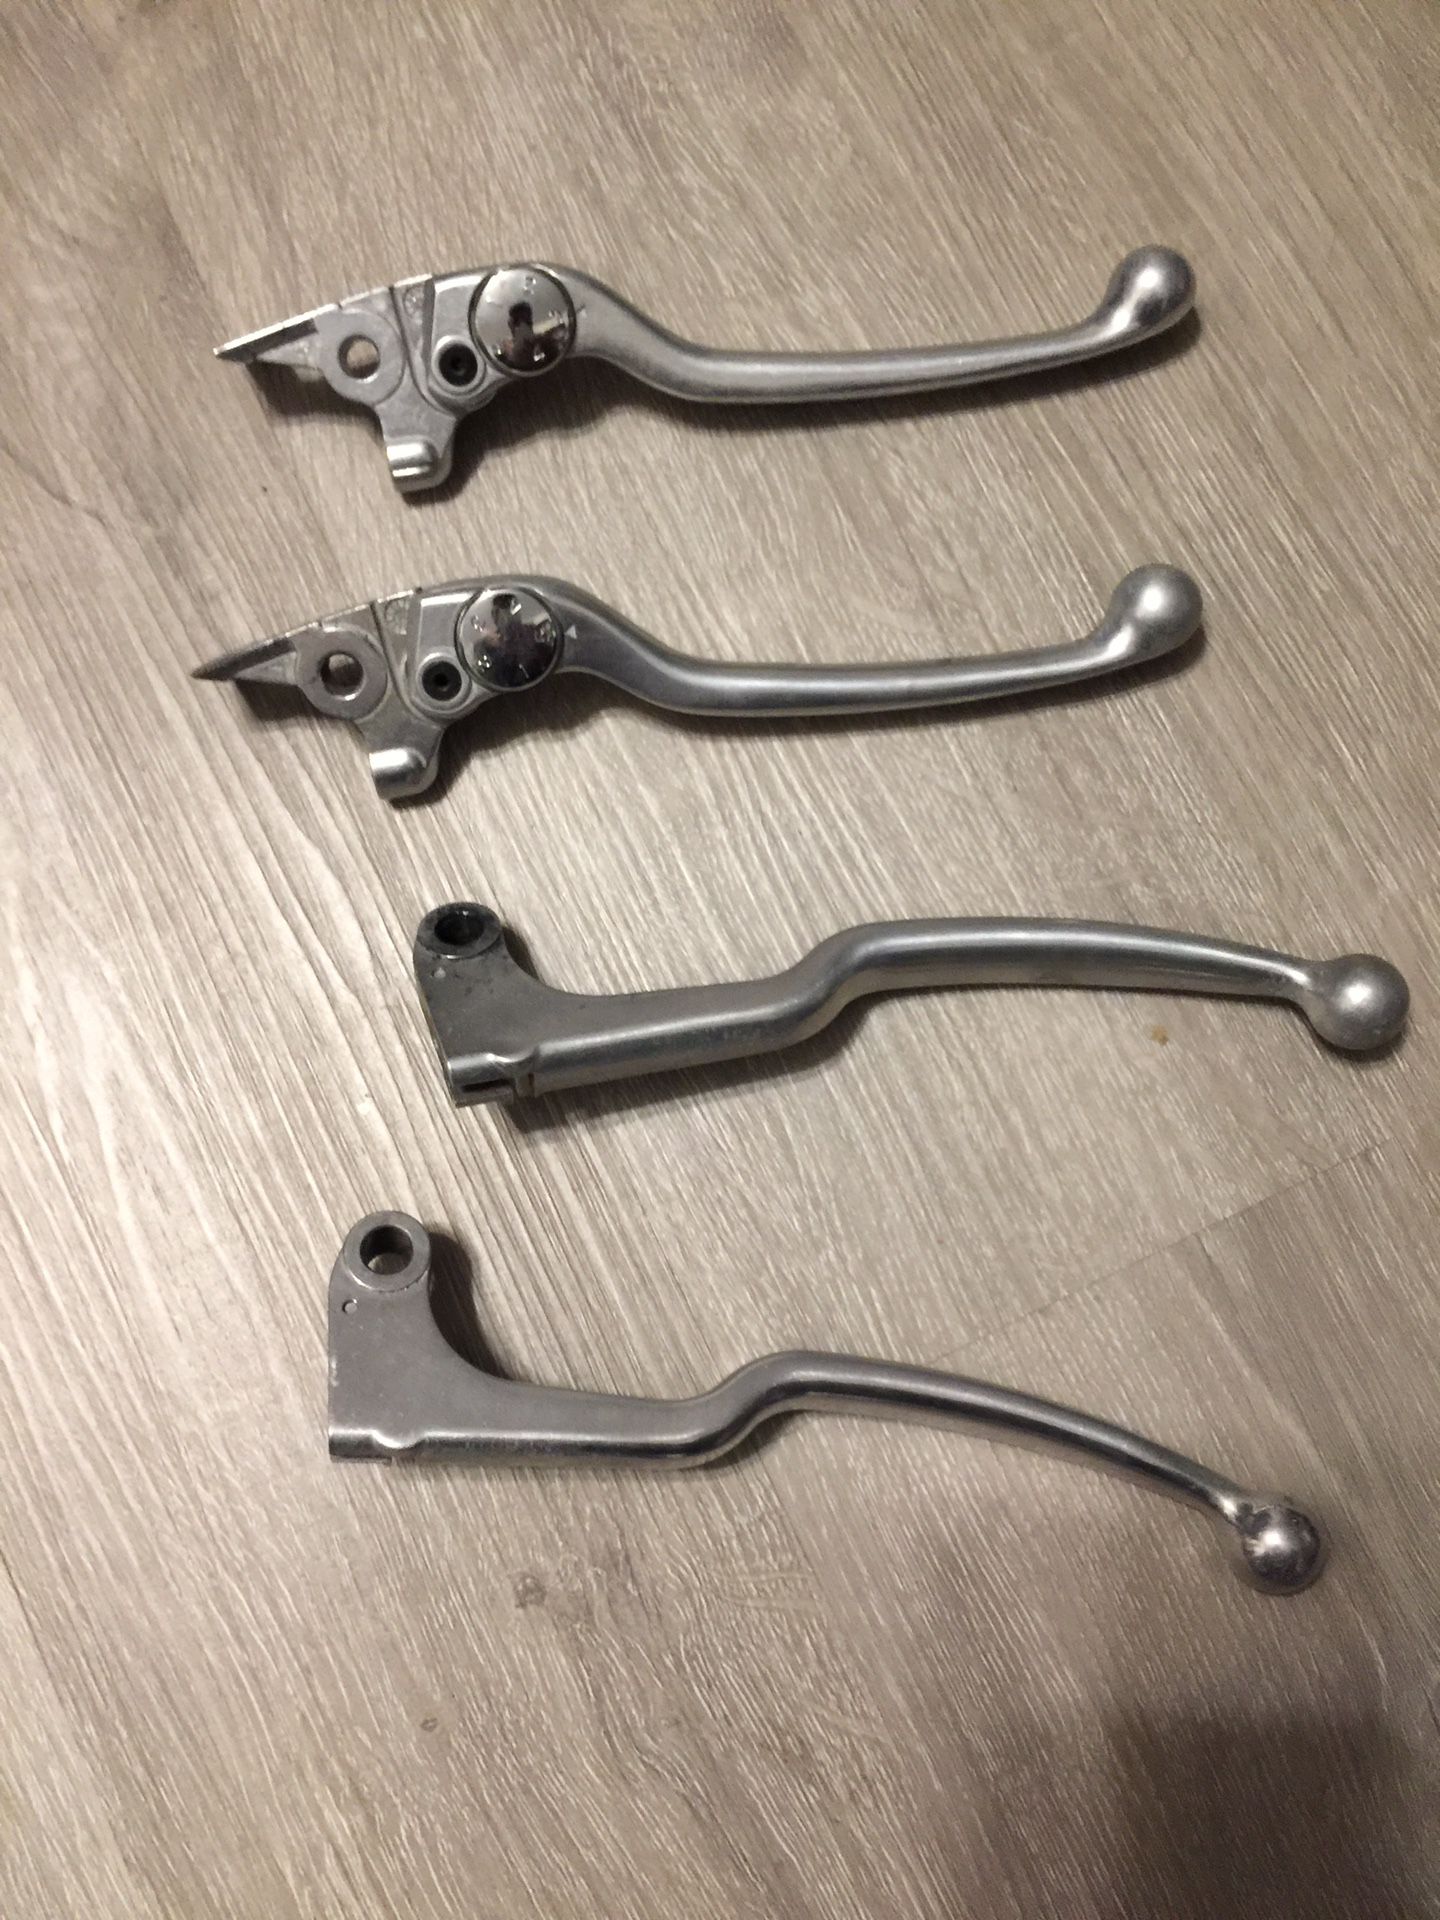 Motorcycle levers